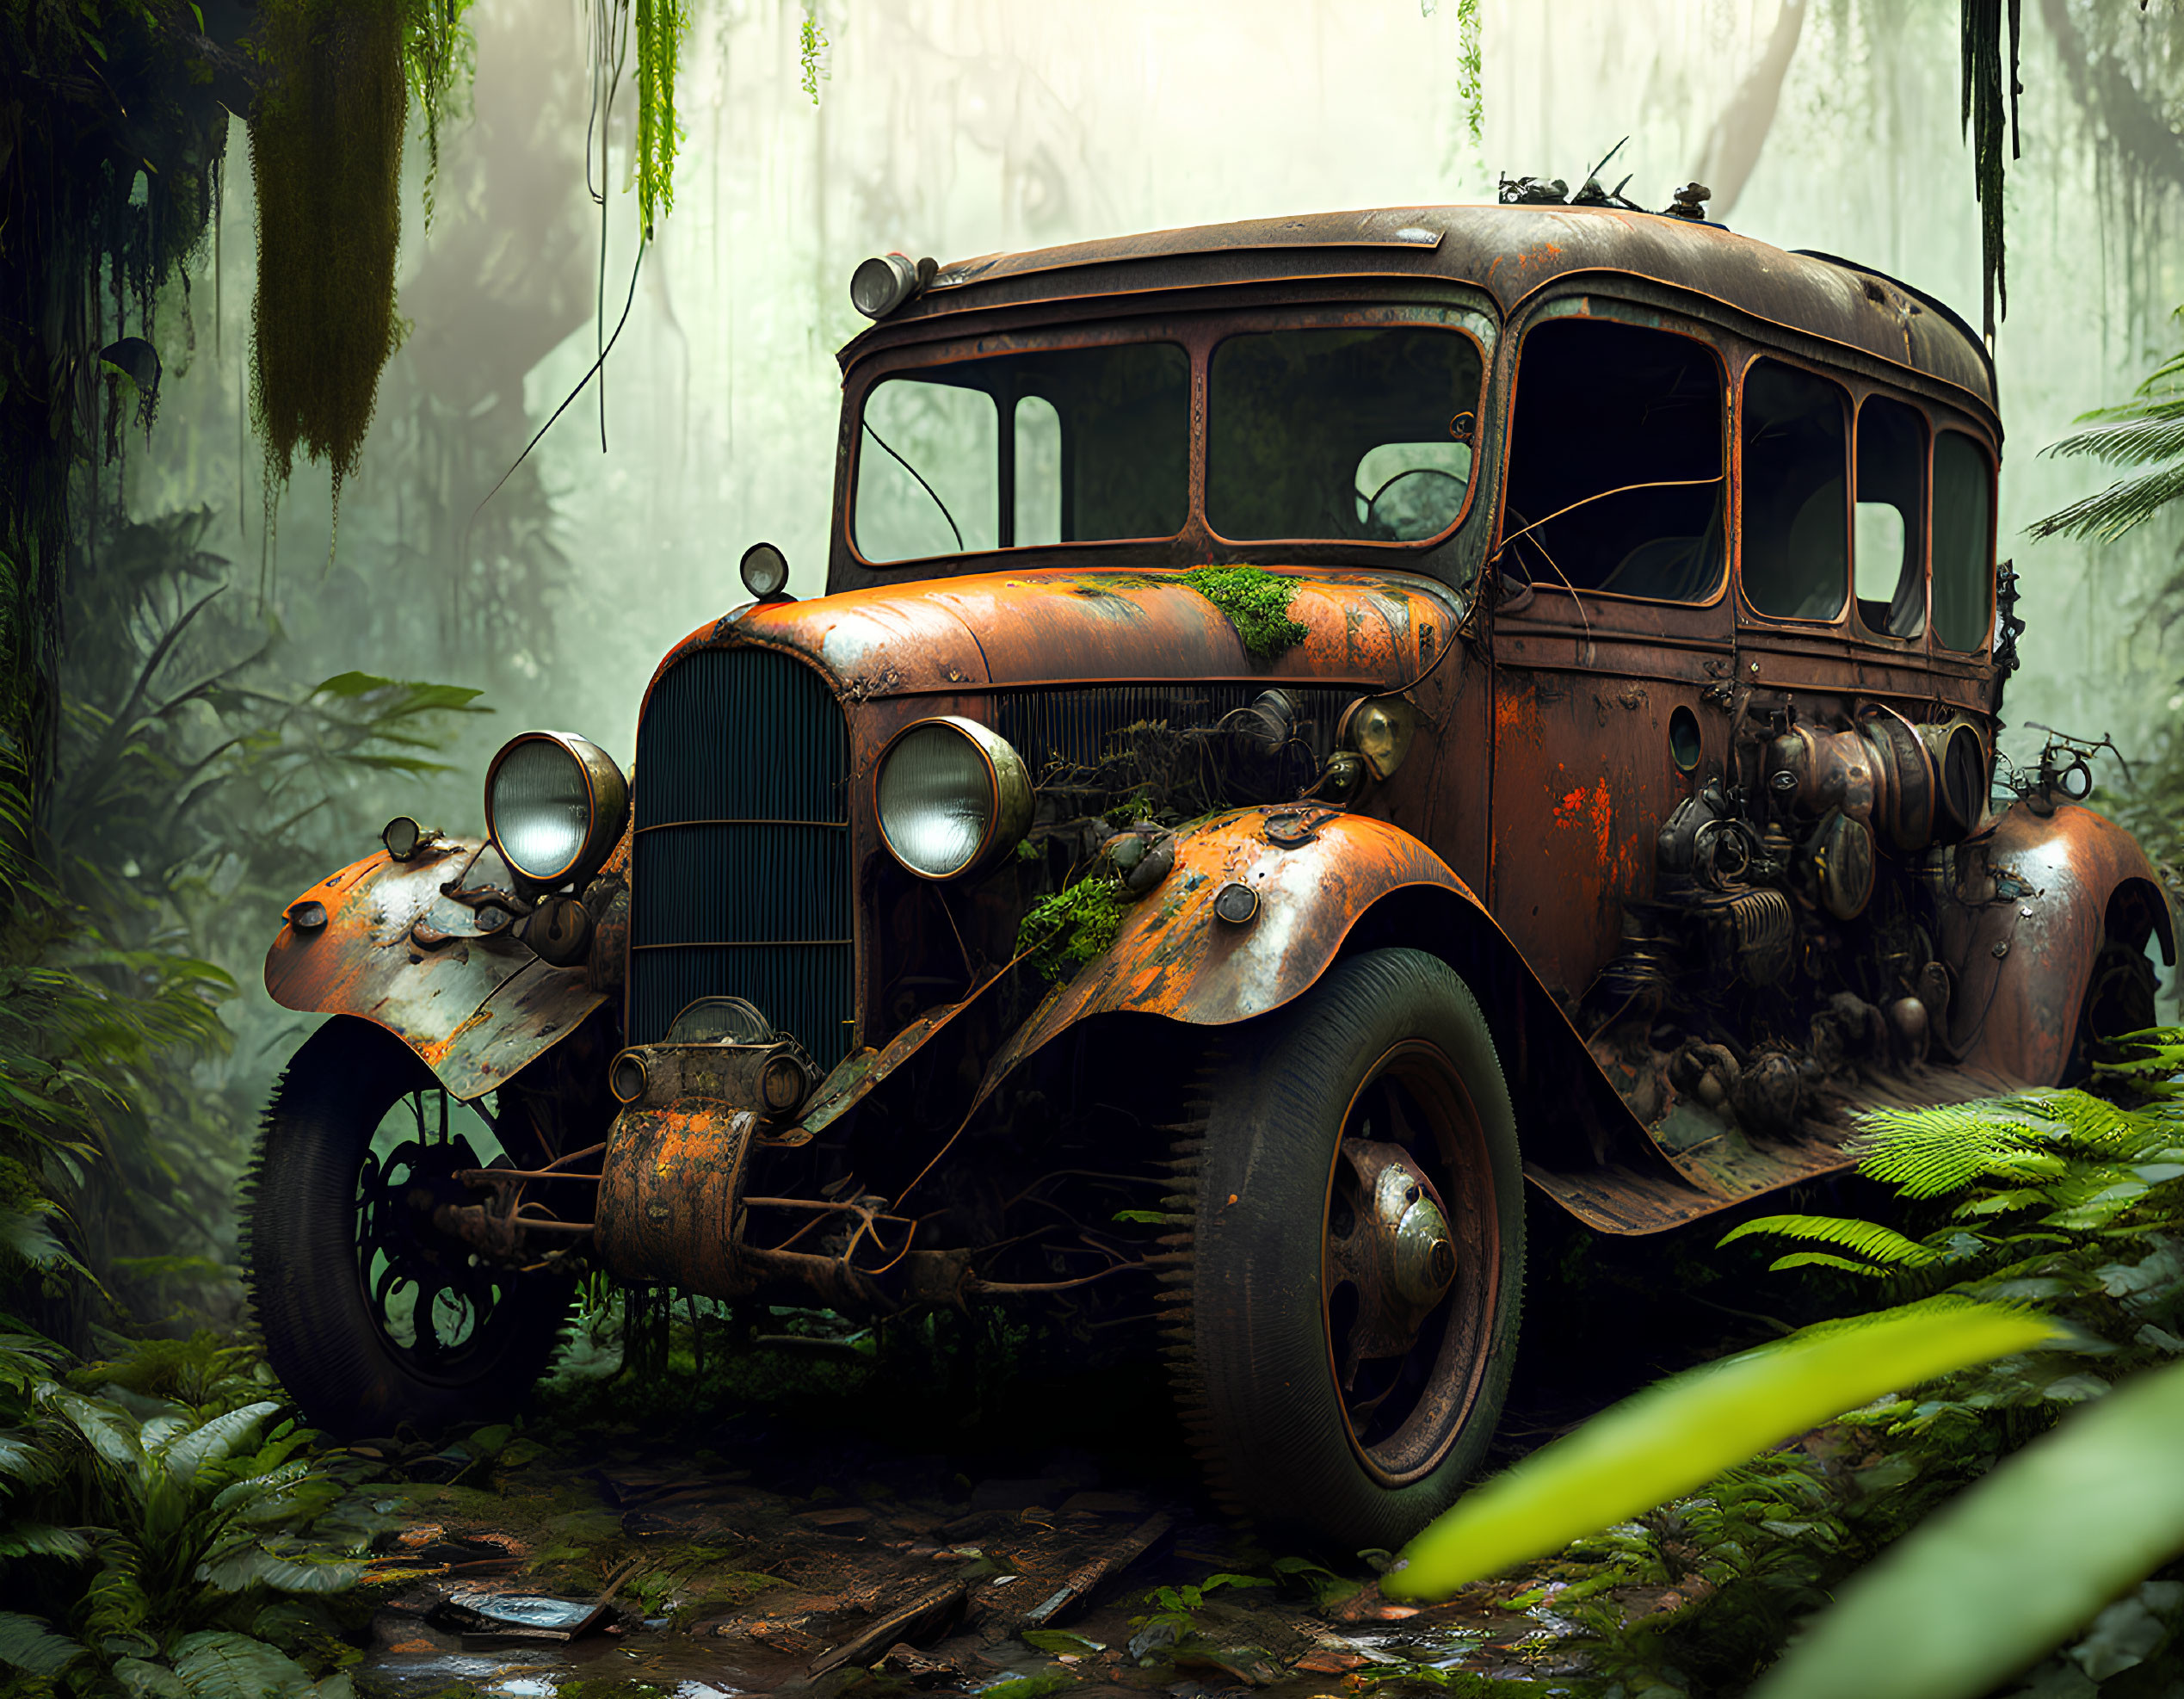 Abandoned rusty car in dense jungle with moss and fog